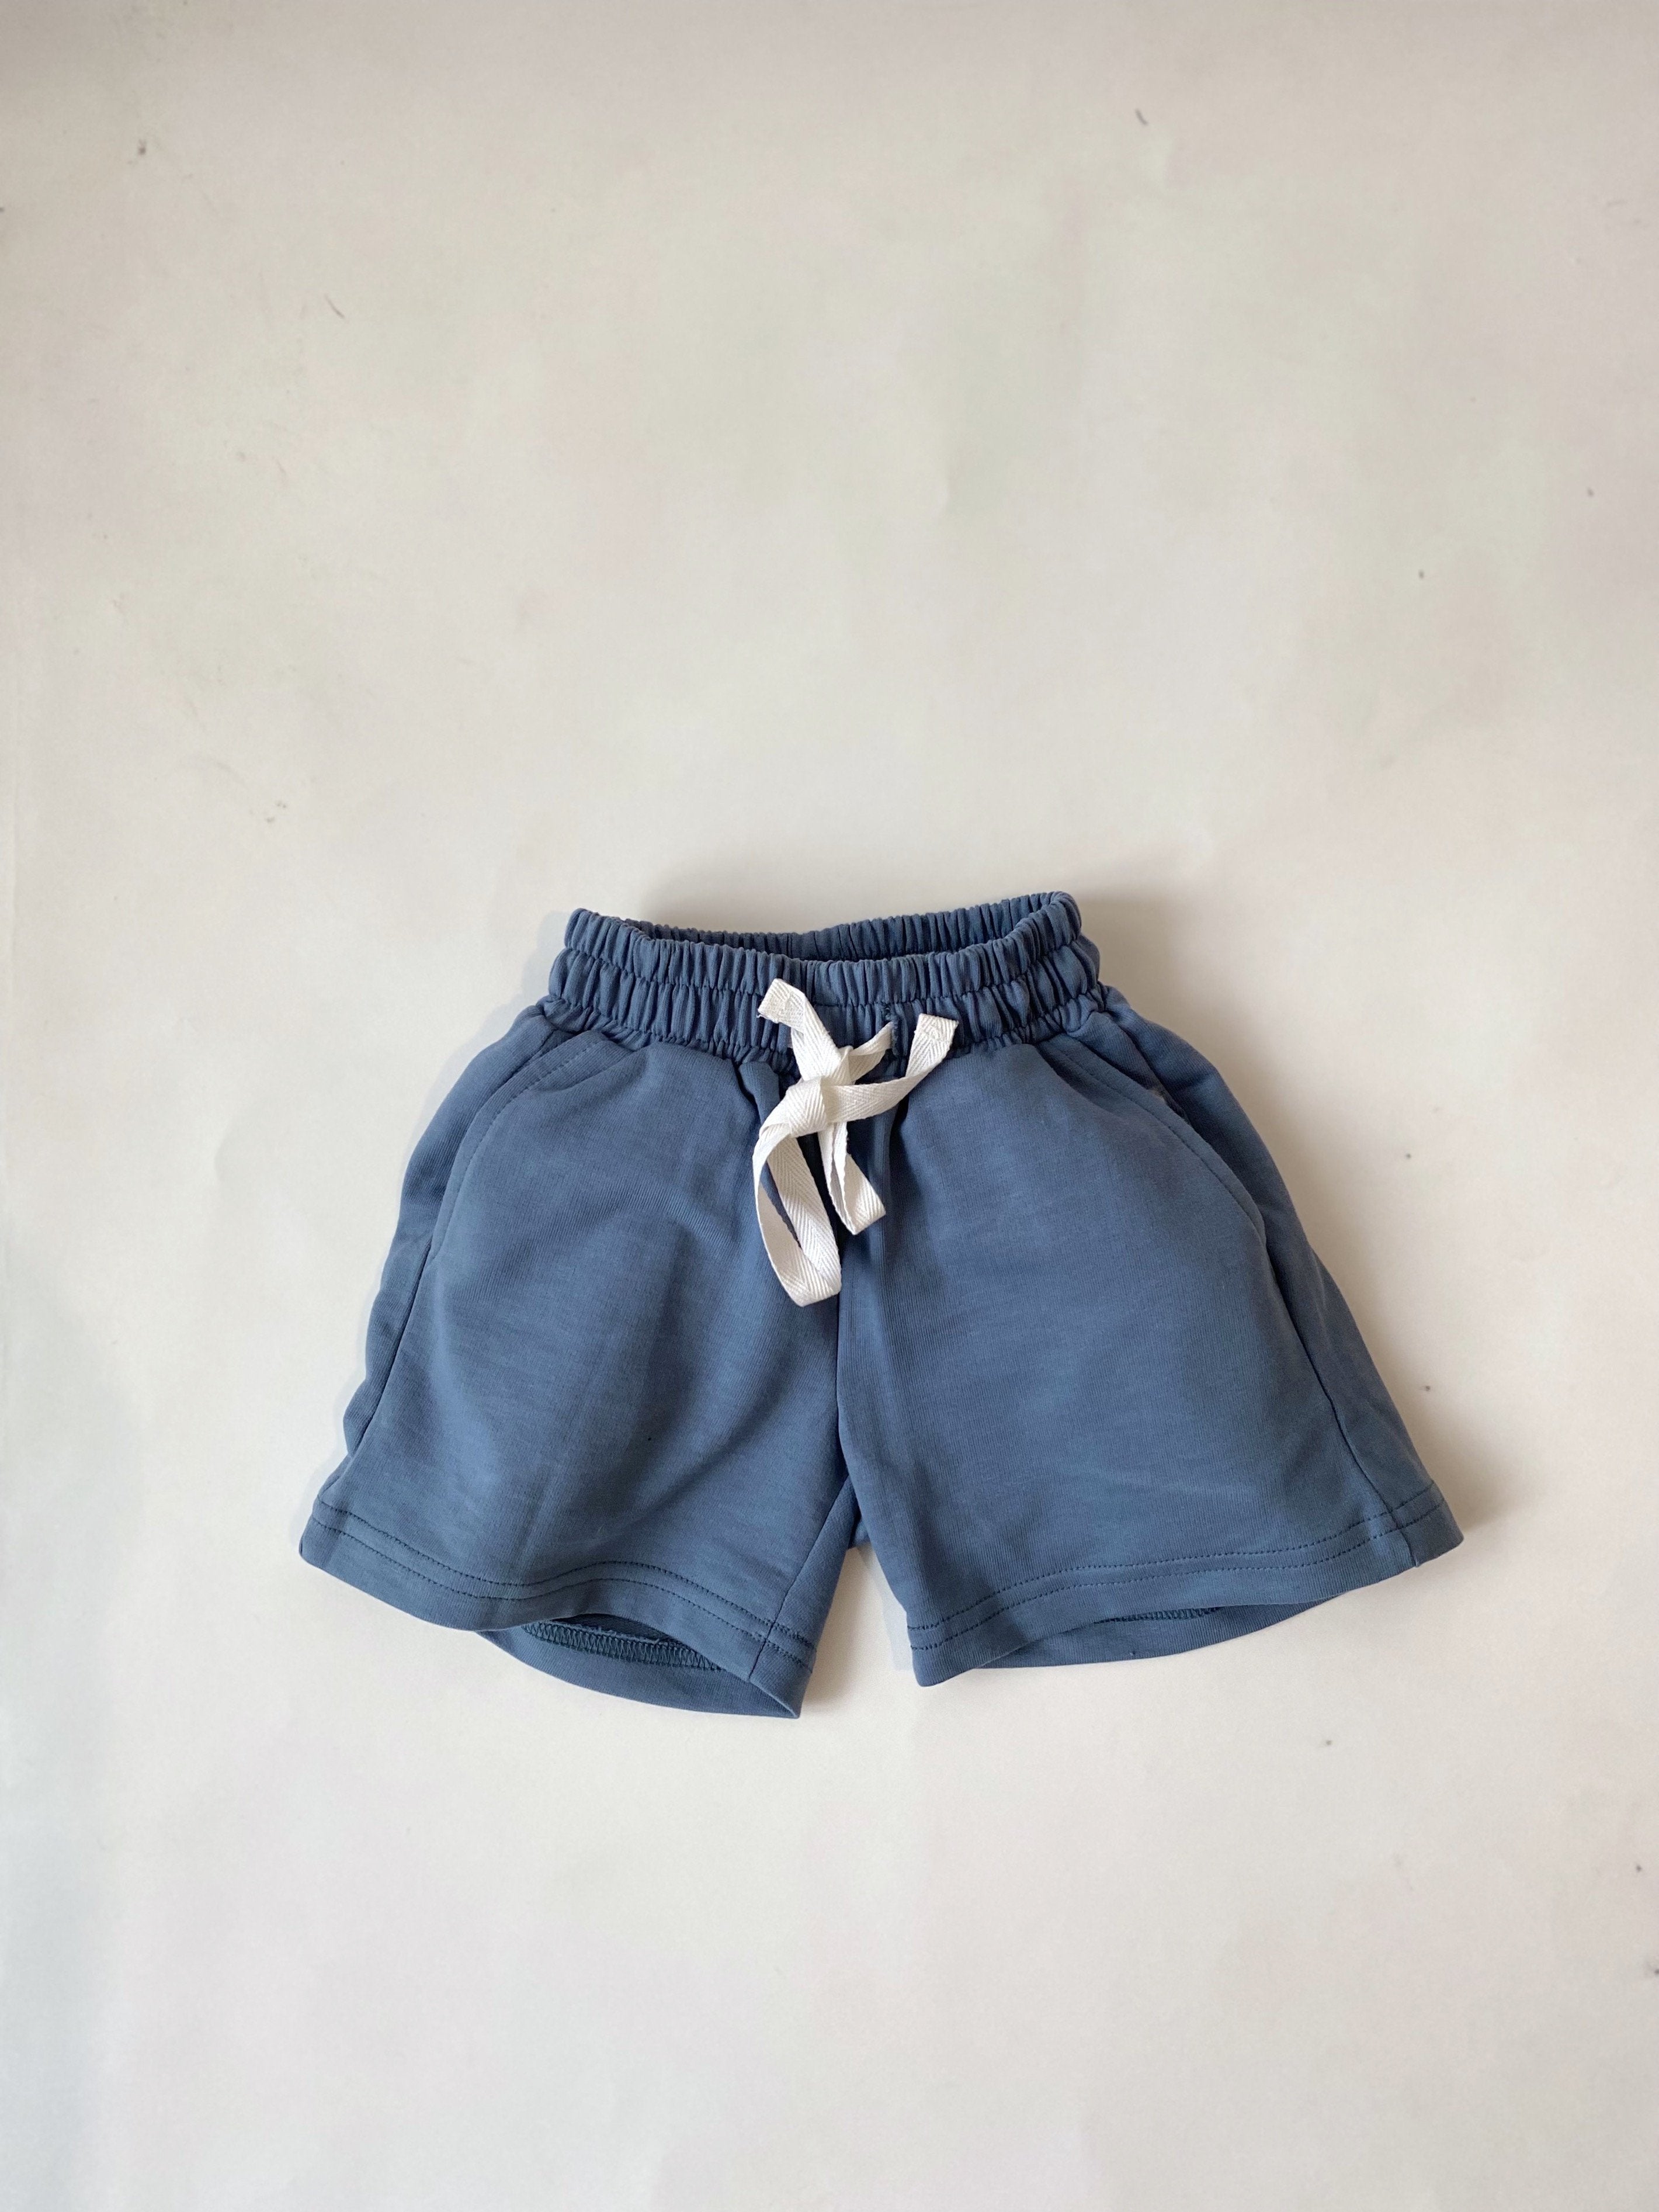 Saltpetre organic, casual unisex kids wear for boy and girls. Shorts with side pockets in blue colour.